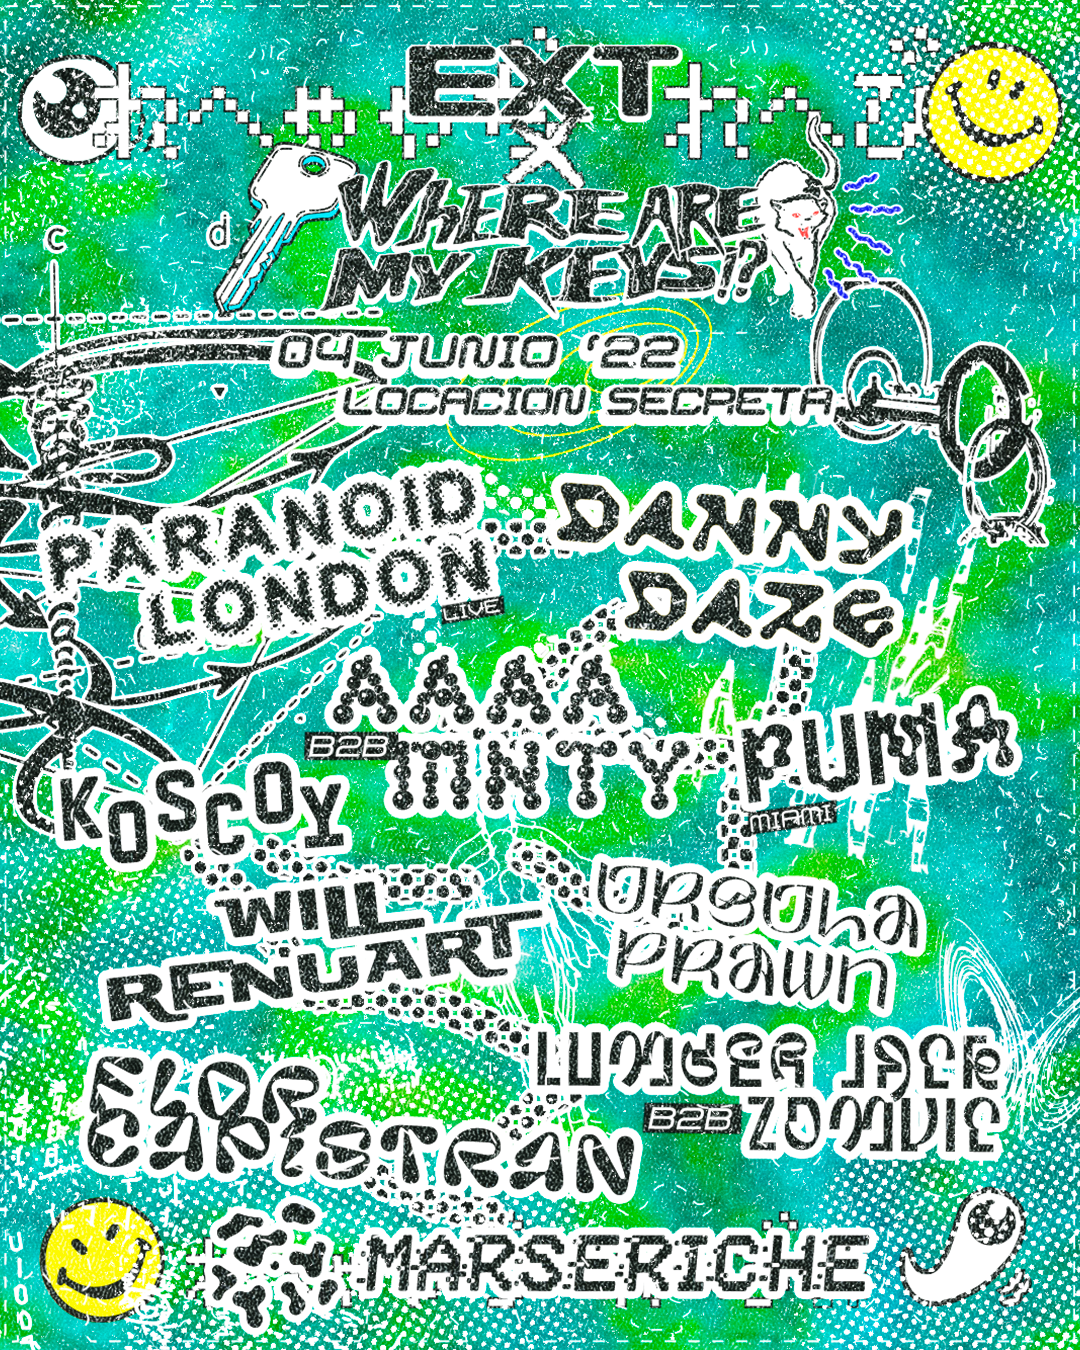 Danny Daze & Paranoid London [live] with EXT - Mexico City - Flyer front